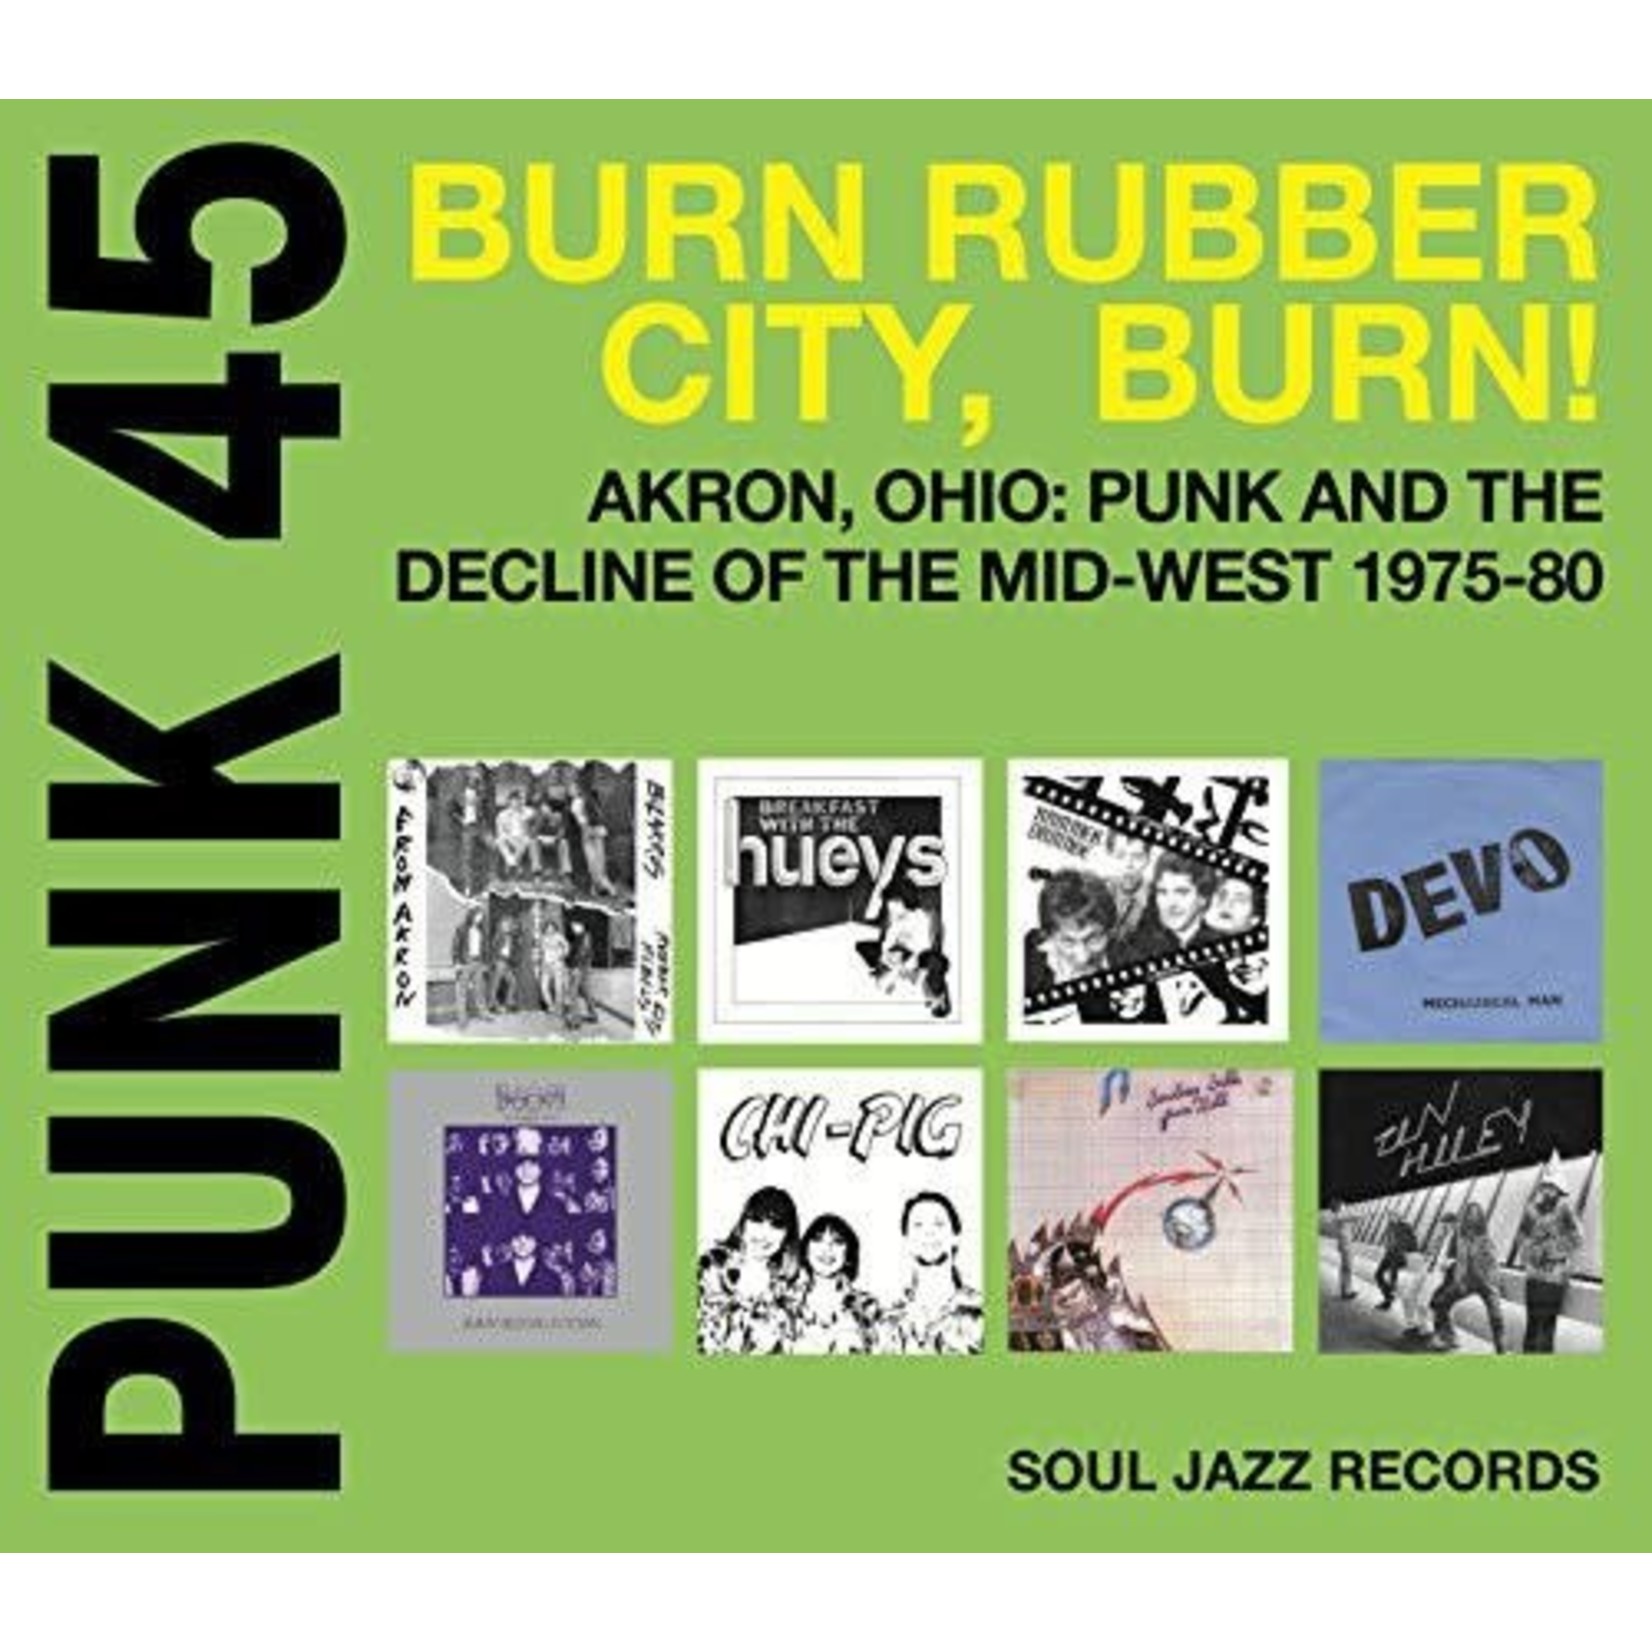 Soul Jazz V/A - Punk 45 Burn, Rubber City, Burn: Akron, Ohio - Punk and the Decline of the Mid-West 1975-80 (2LP)